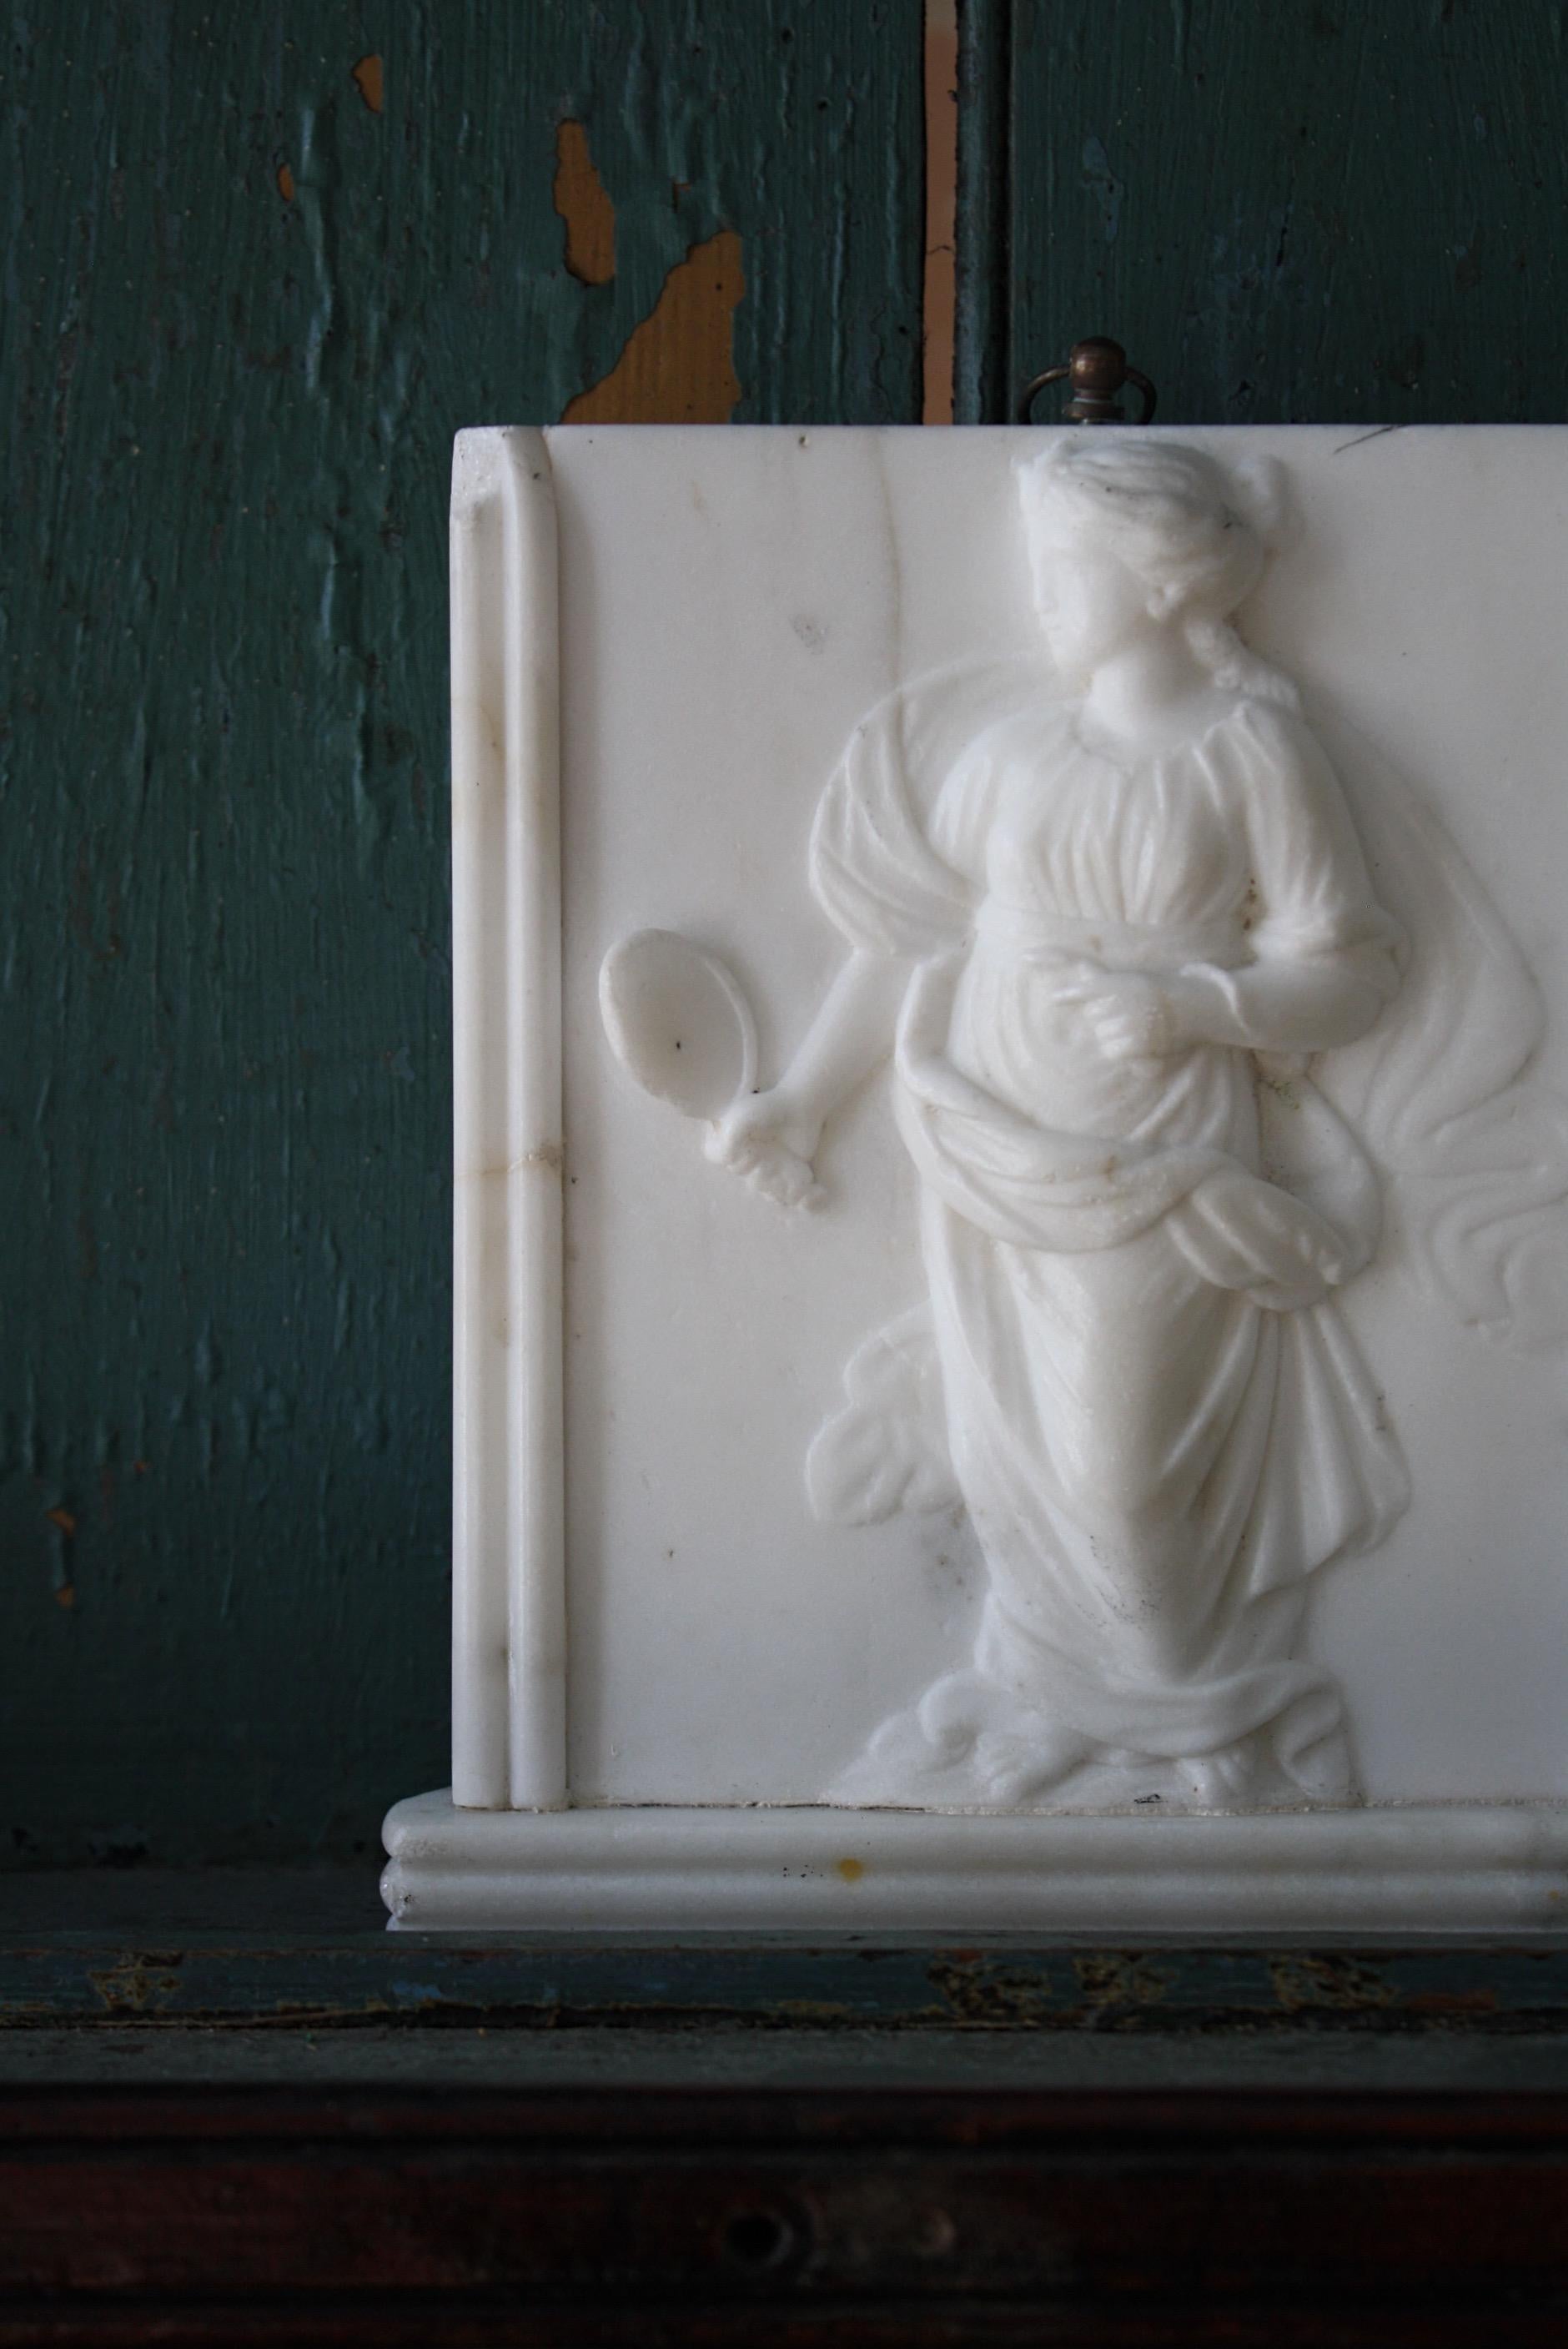 A finely carved pair of early 19th century marble tablets depicting the goddess of truth Veritas and Themis the goddess of justice once part off a fire surround.

Later hanging hoops added, age related wear and discolouration. 

Very much in the